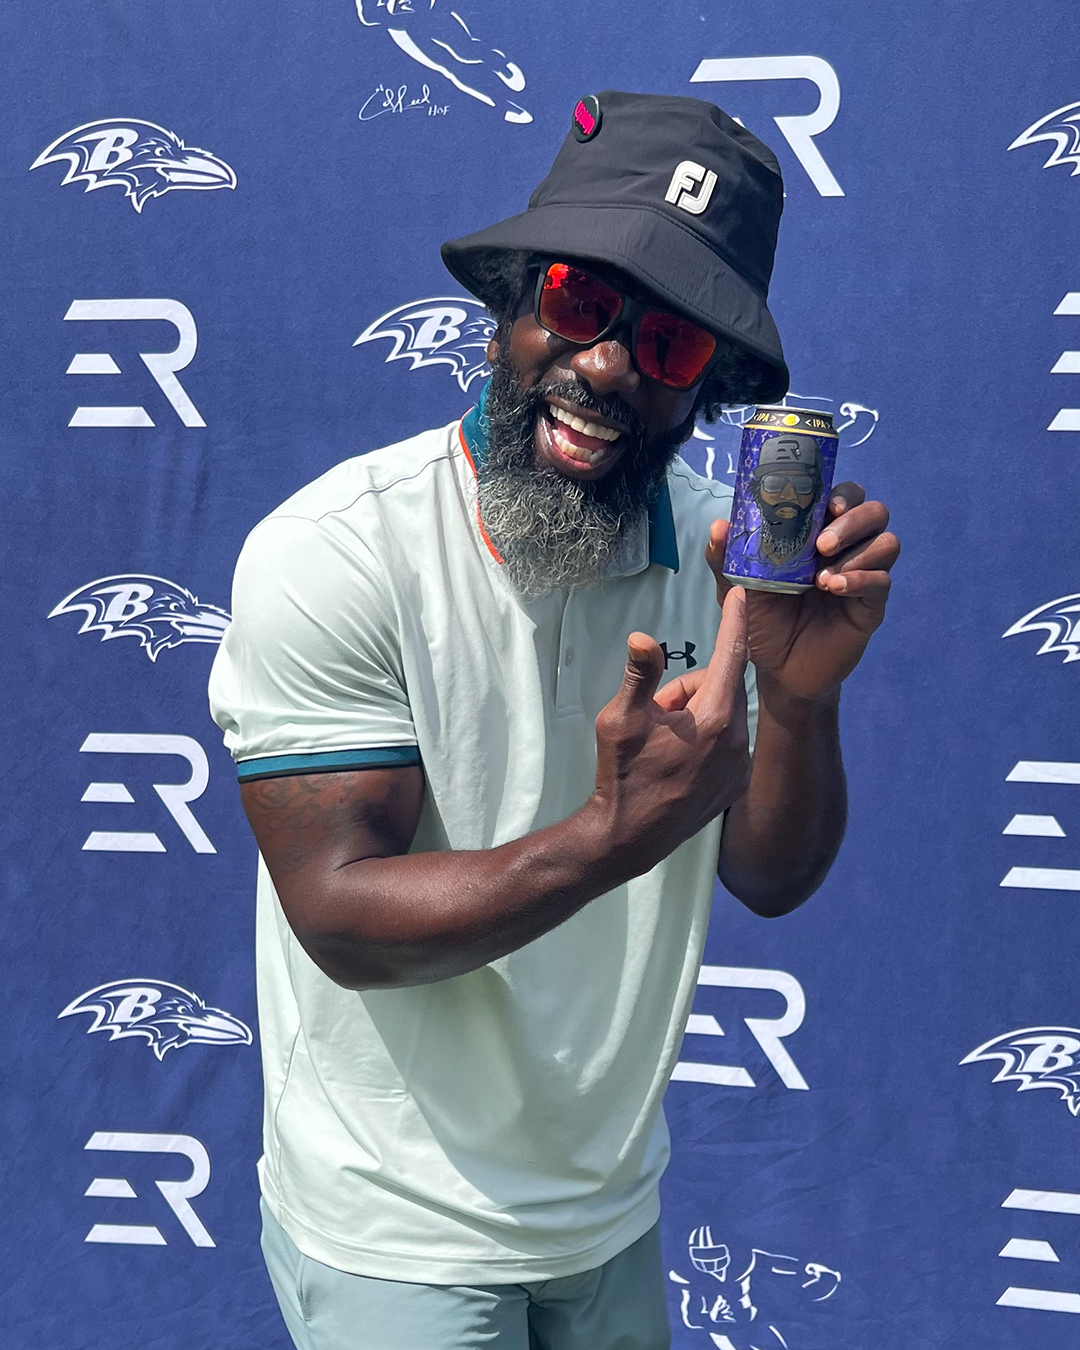 “UNION Craft Brewing releases “G.O.A.T. IPA” in tribute to Hall of Fame Baltimore Raven, Ed Reed” – Release